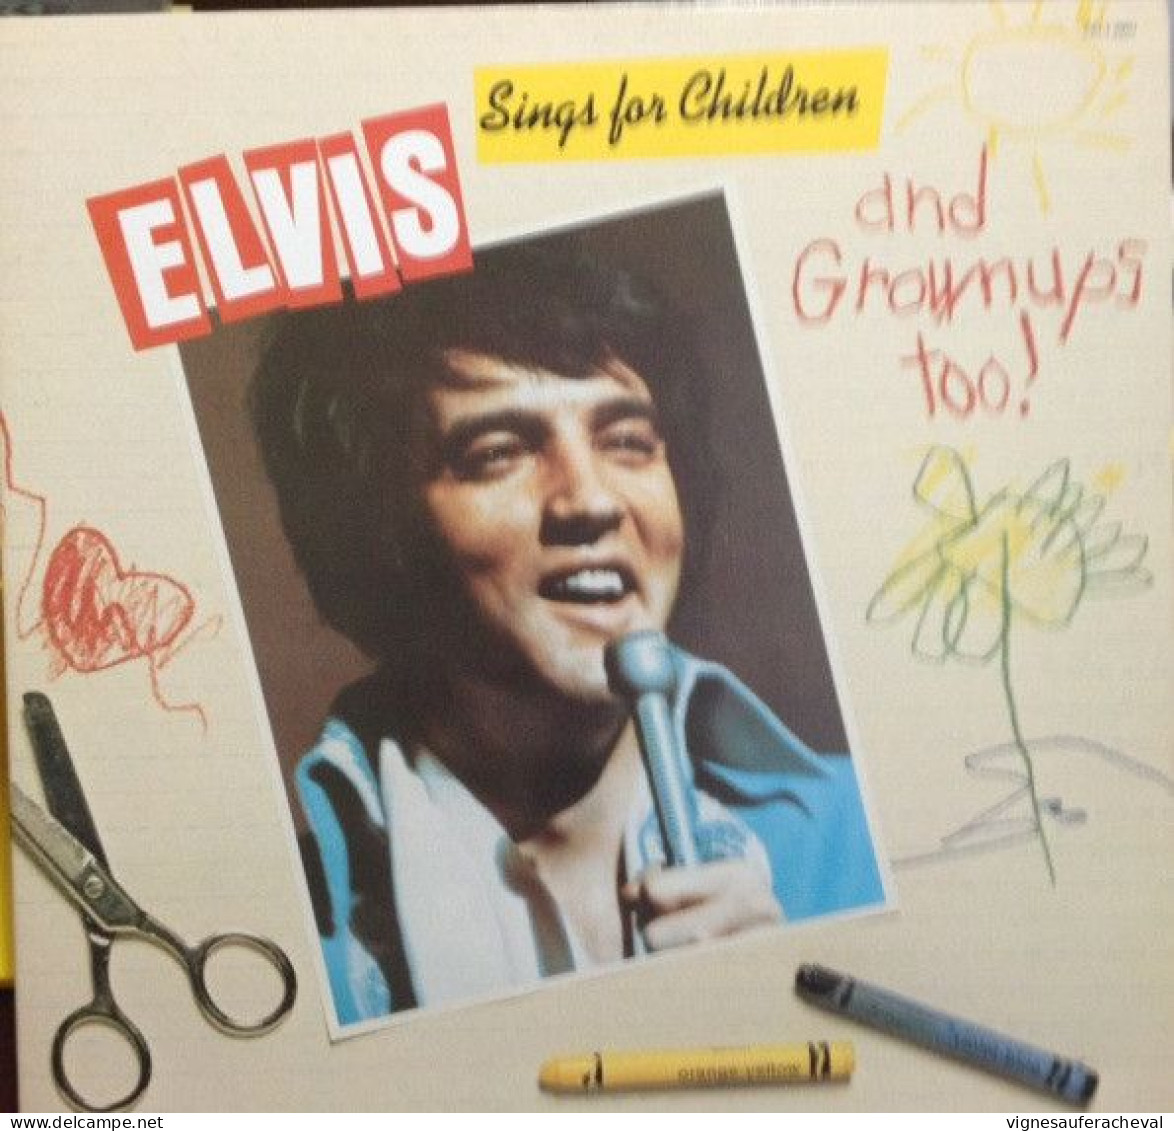 Elvis Presley - Elvis Sings For Children And Grownups Too!! - Other - English Music